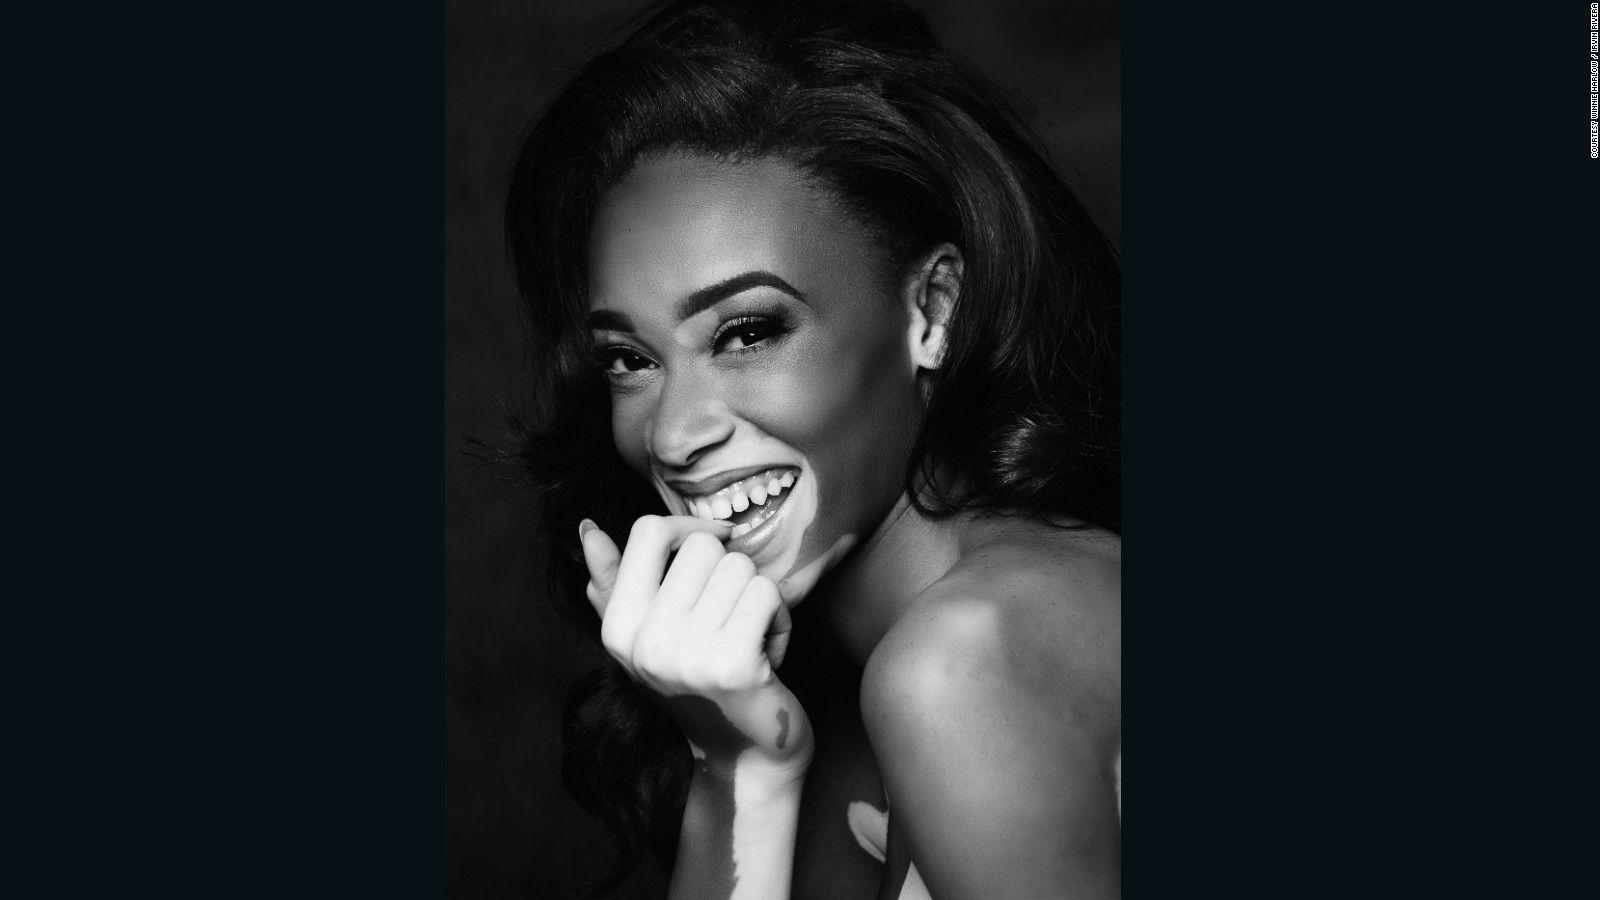 Winnie Harlow's changing the face of fashion